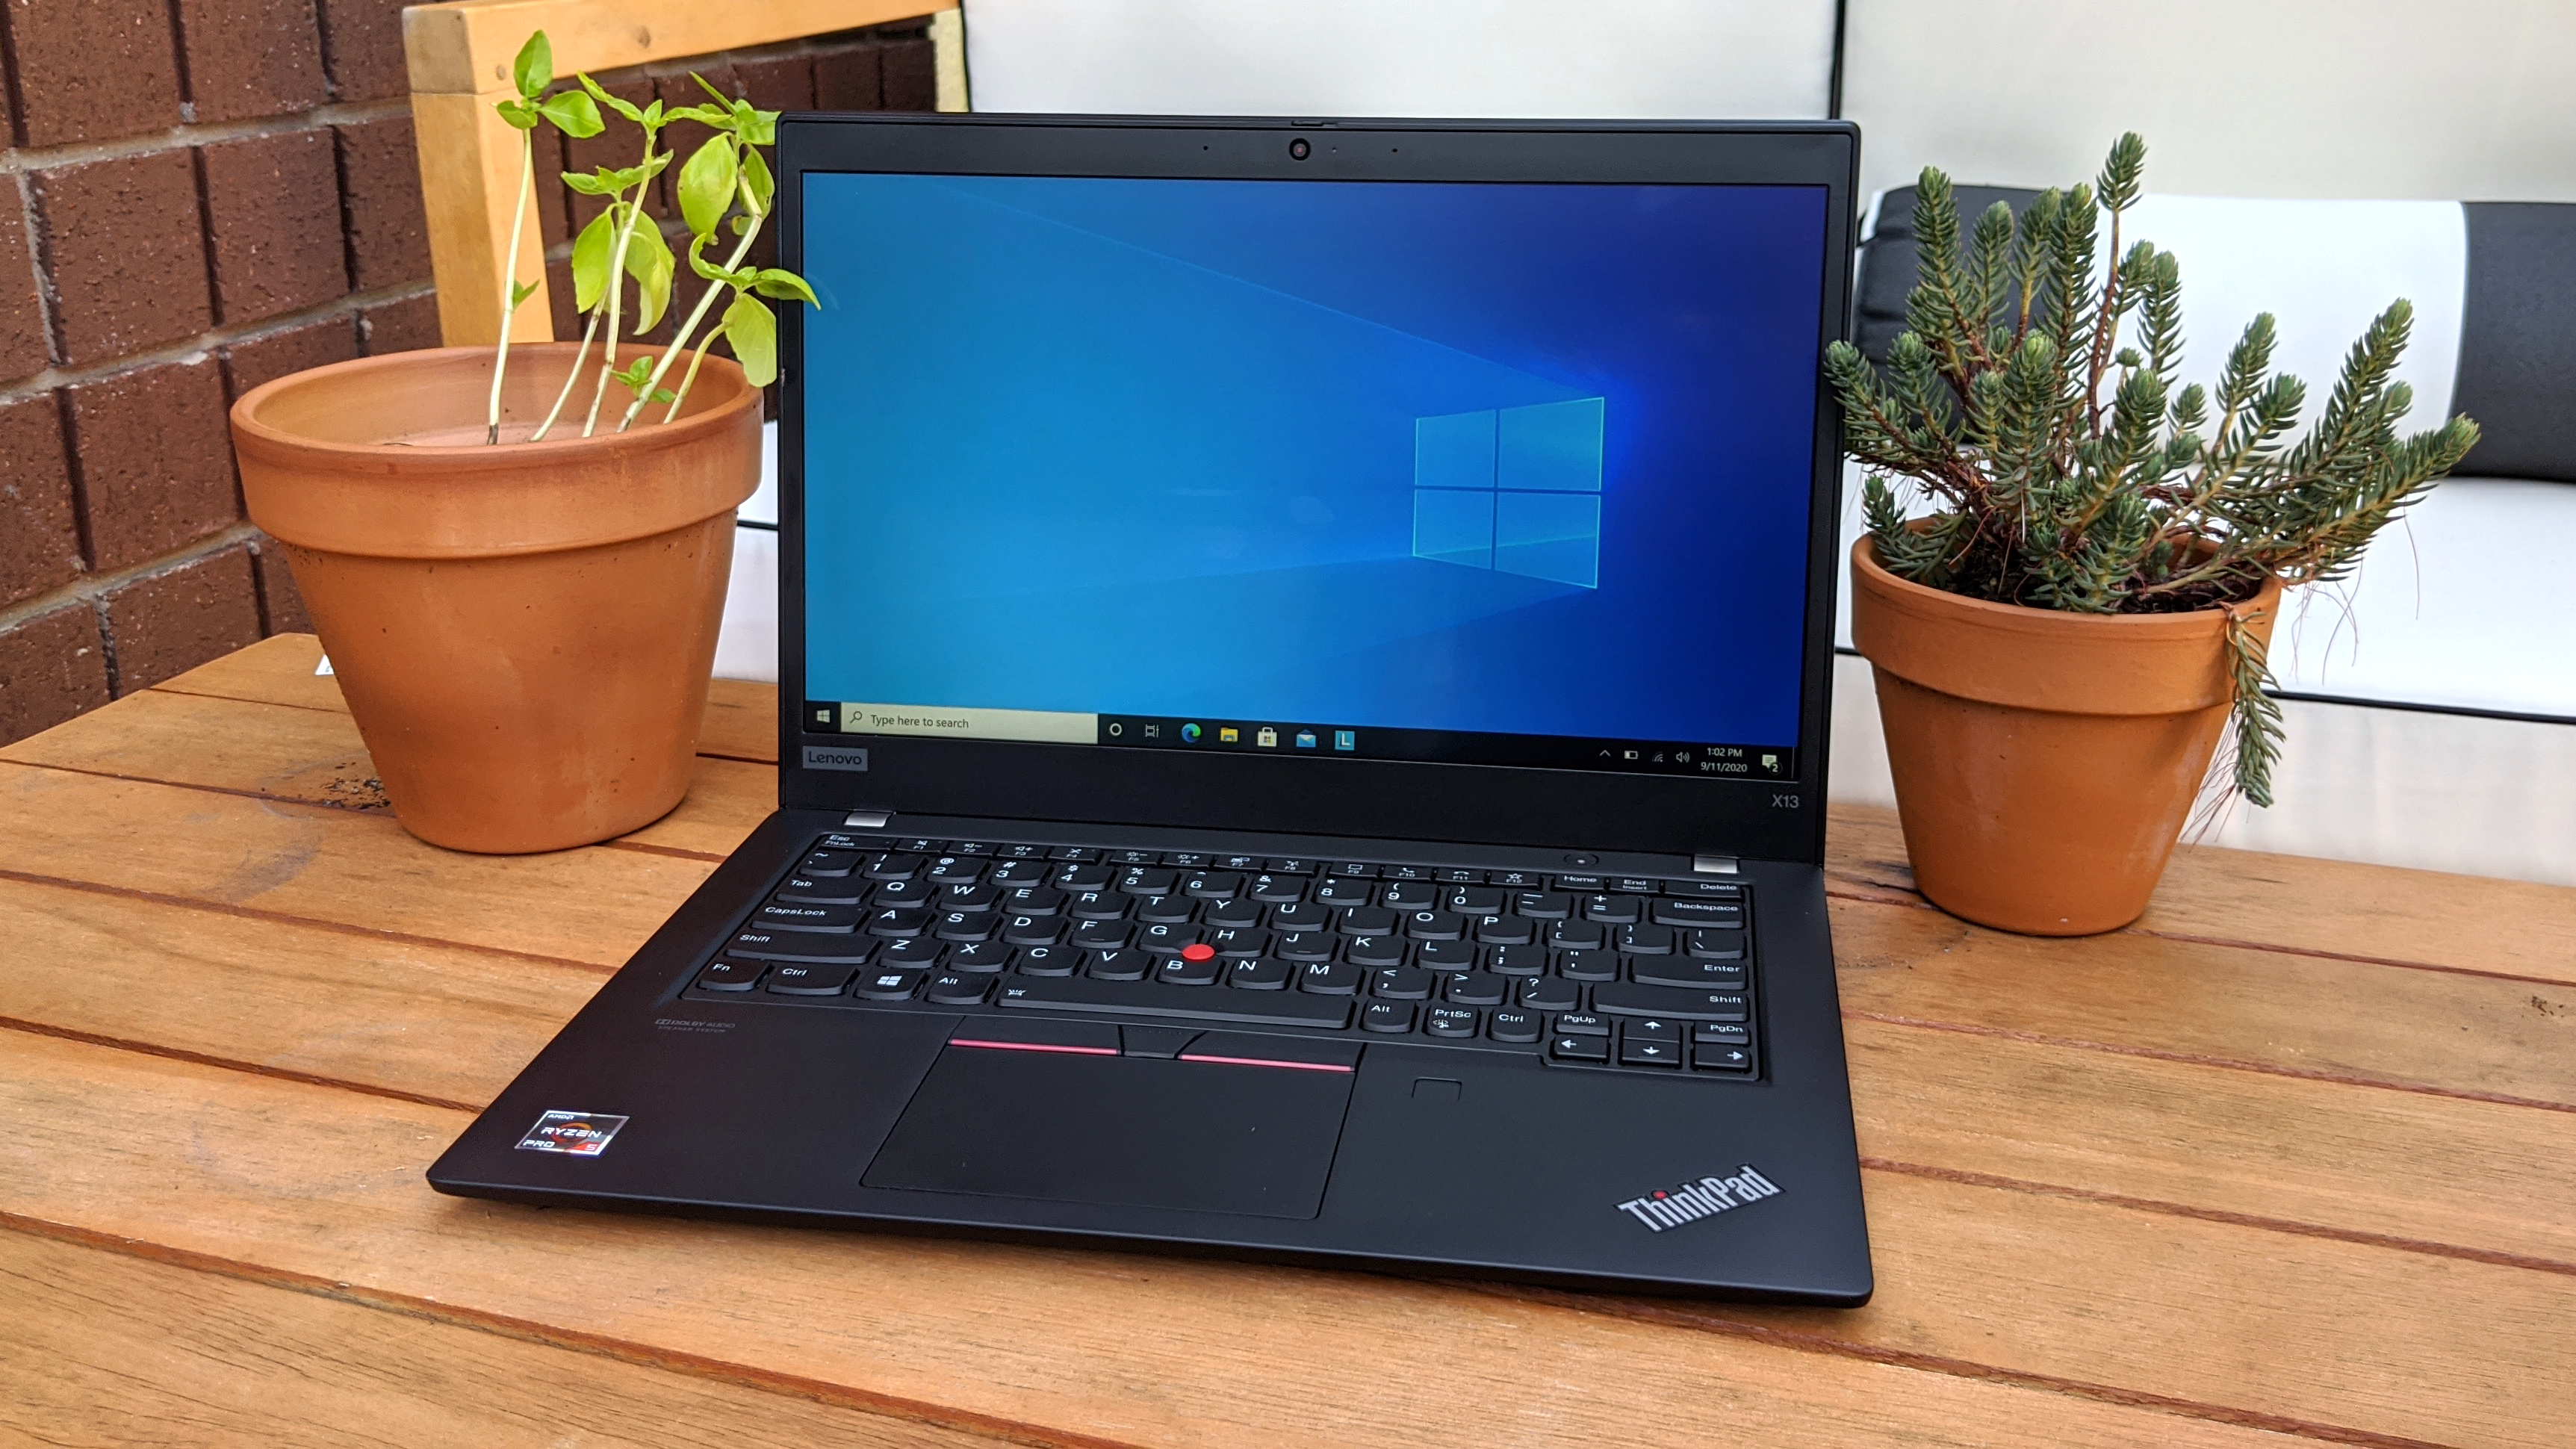 If you want a value pick, the ThinkPad X13 is the best Lenovo laptop for under $1,000.&nbsp;